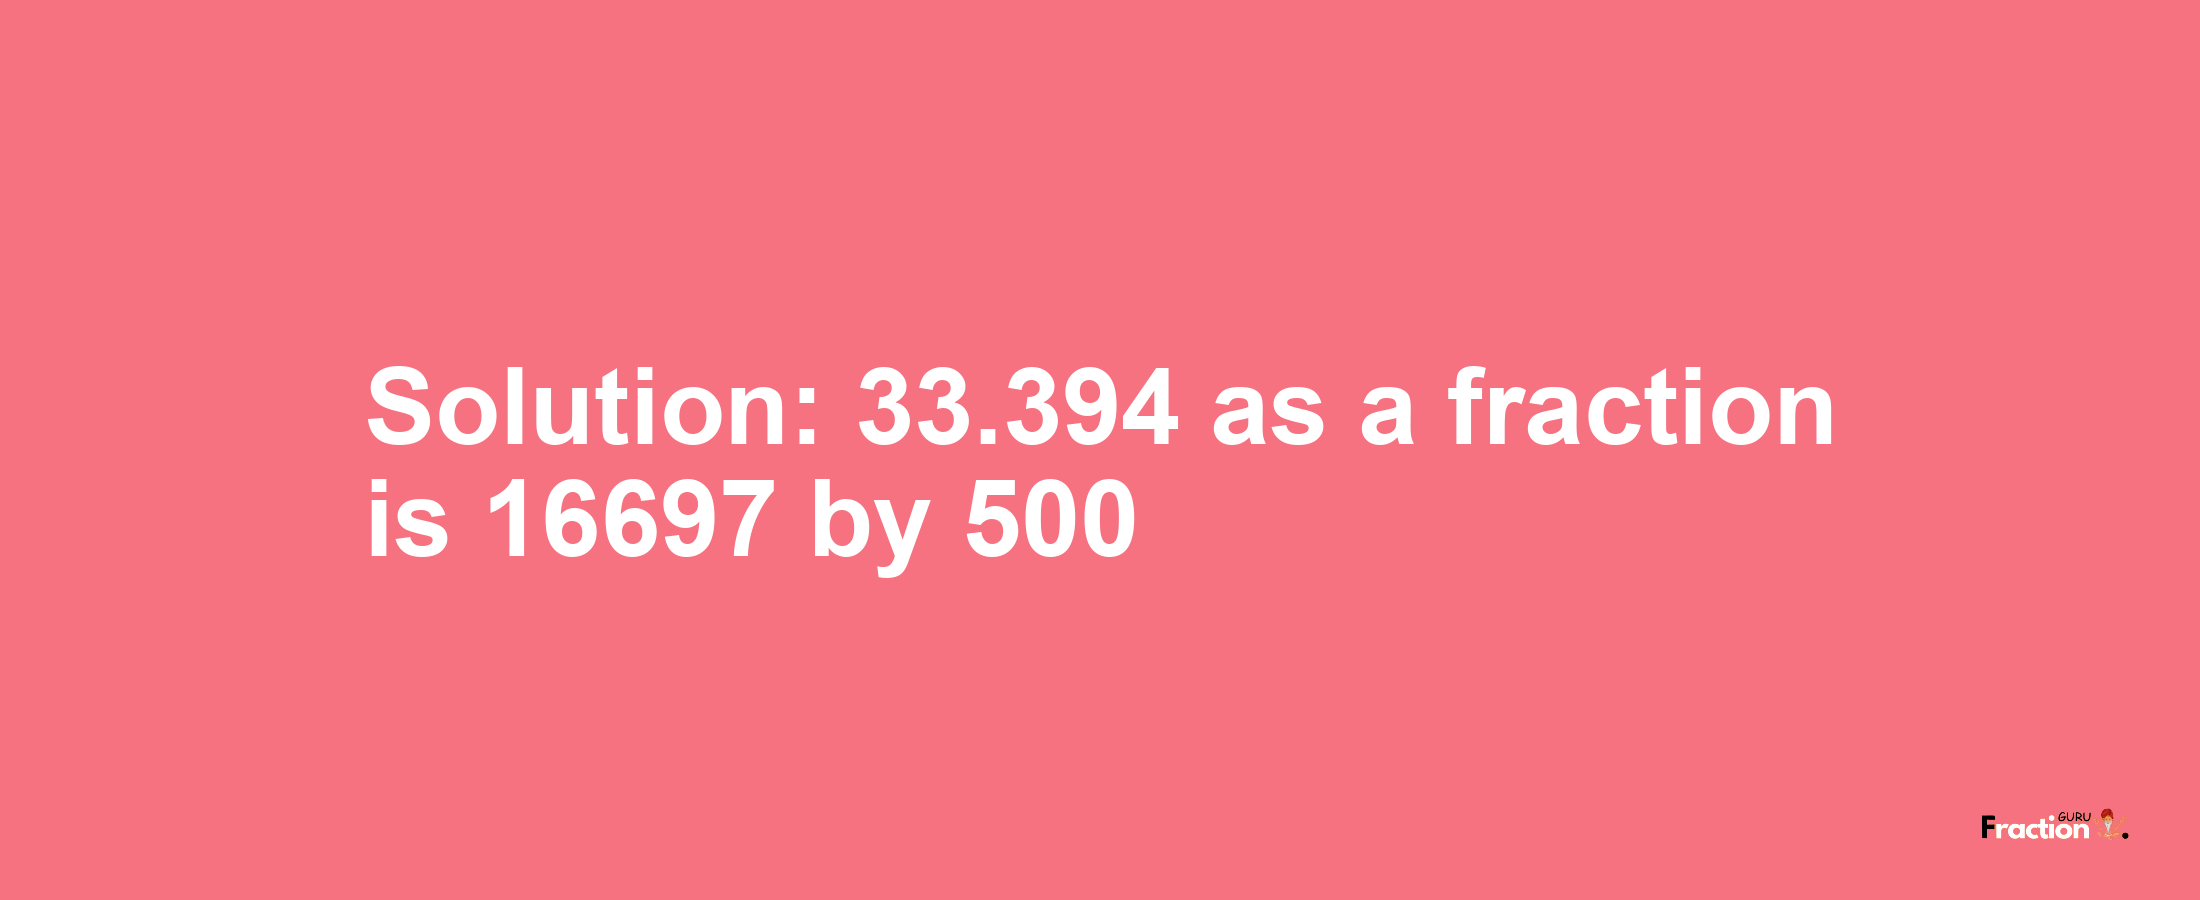 Solution:33.394 as a fraction is 16697/500